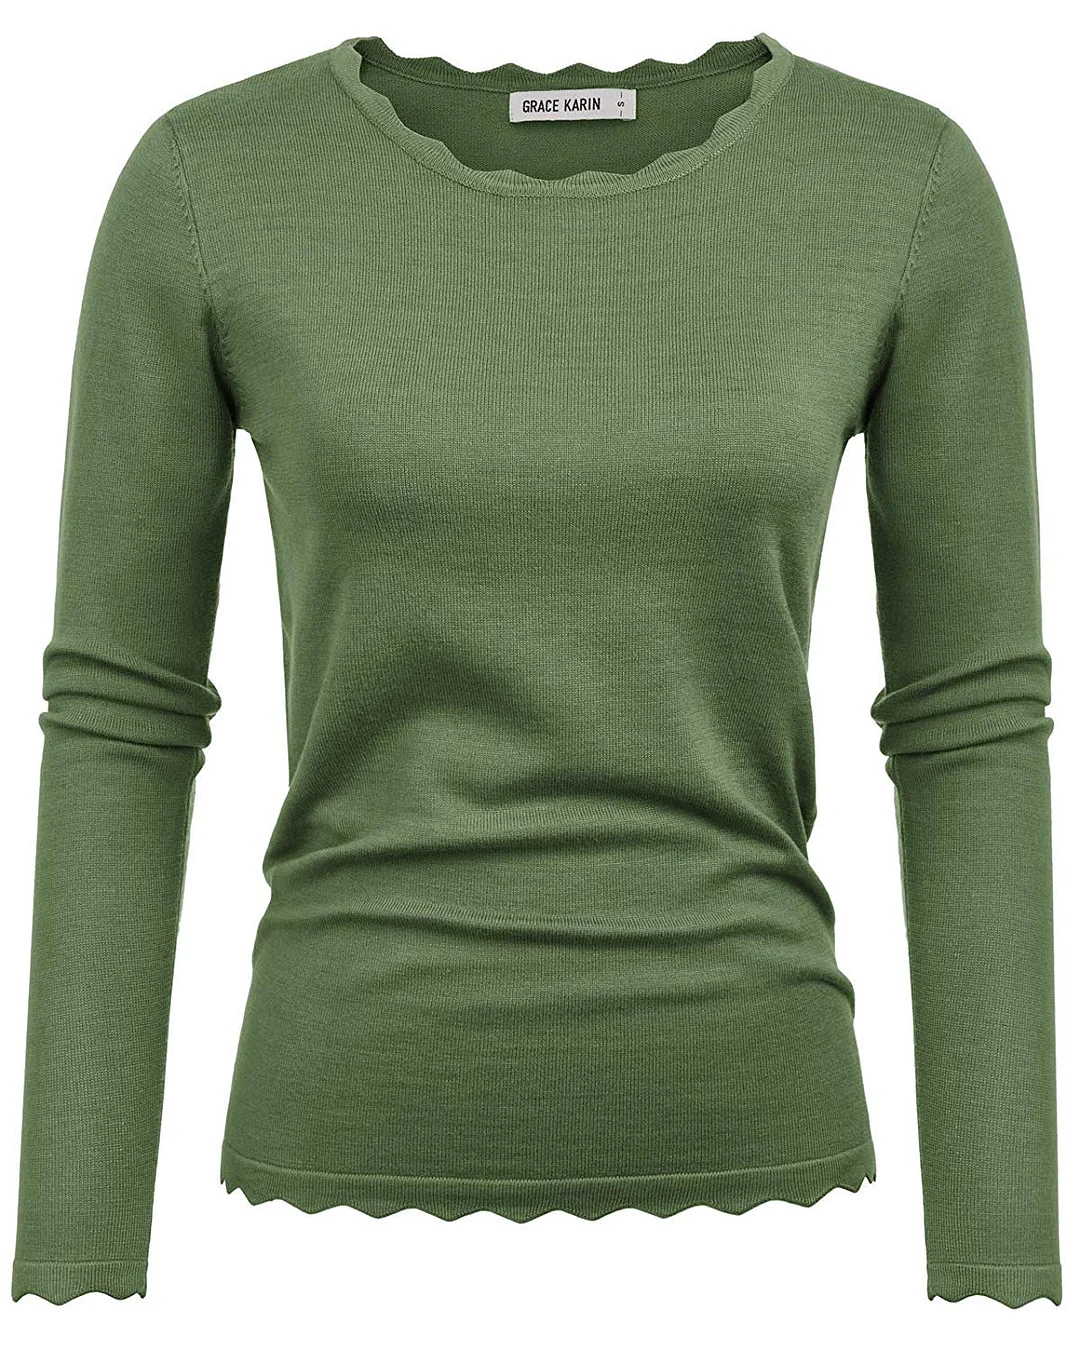 Women's High Stretchy Long Sleeve Pullover Sweater Blouse Top